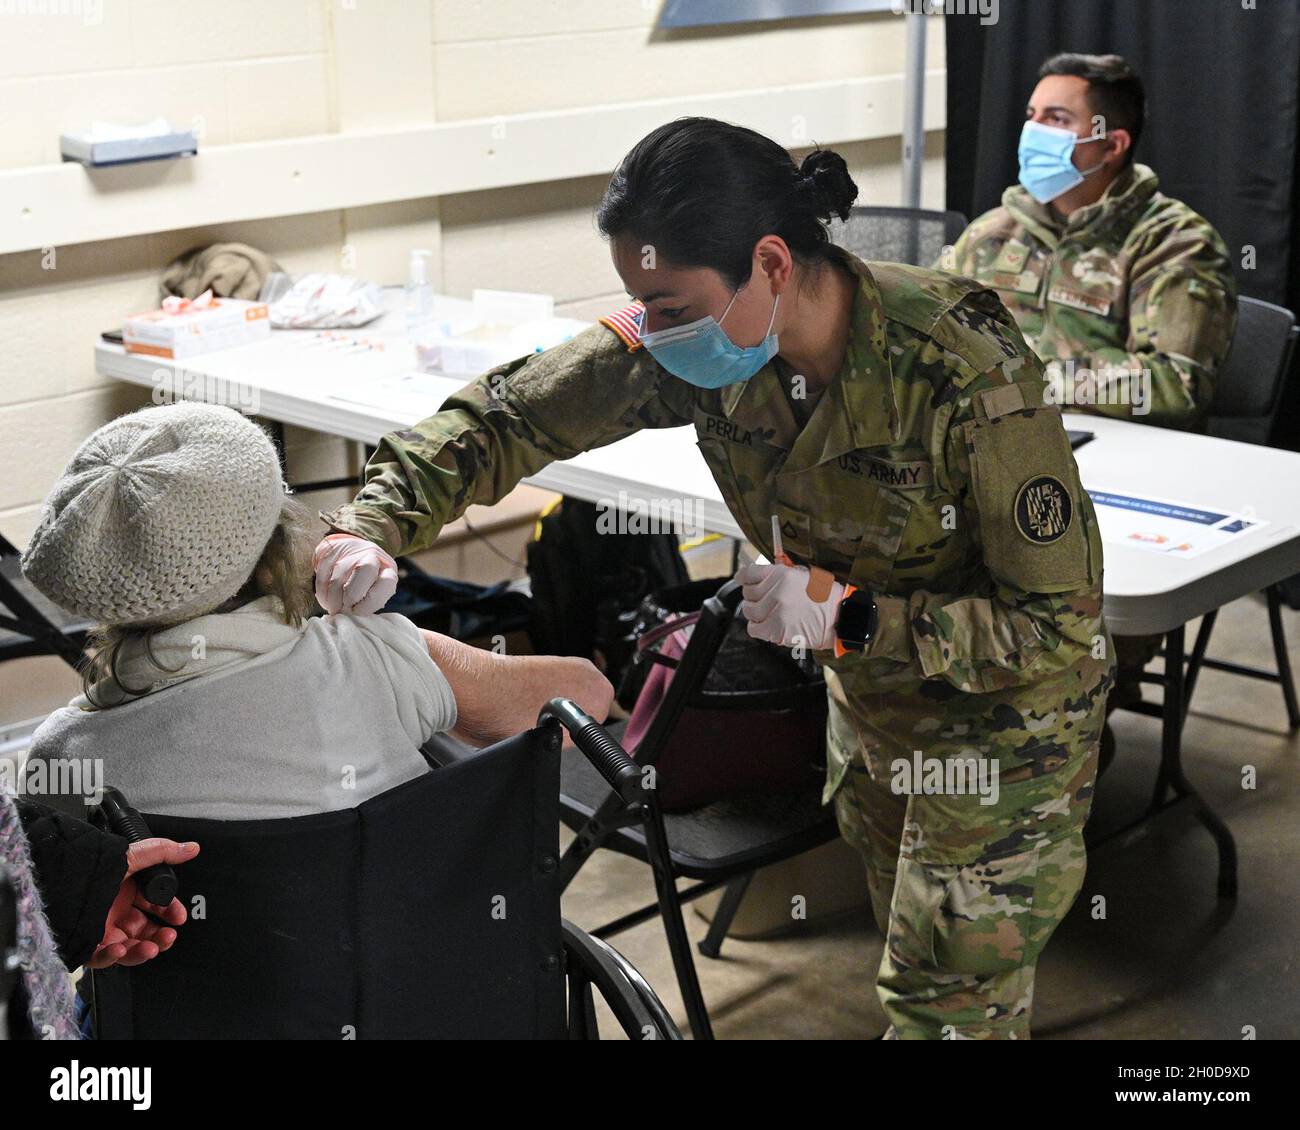 Pfc. Perla Keiry, combat medic assigned to the 224th Medical Company Area Support, Maryland Army National Guard, prepares to administer a COVID-19 vaccine at the Talbot County Community Center, Easton, Md., on January 29, 2021. Maryland National Guard members are supporting the COVID-19 vaccination initiative with mobile vaccination support teams, which are providing medical and logistical support to county health departments during the global COVID-19 pandemic. Stock Photo